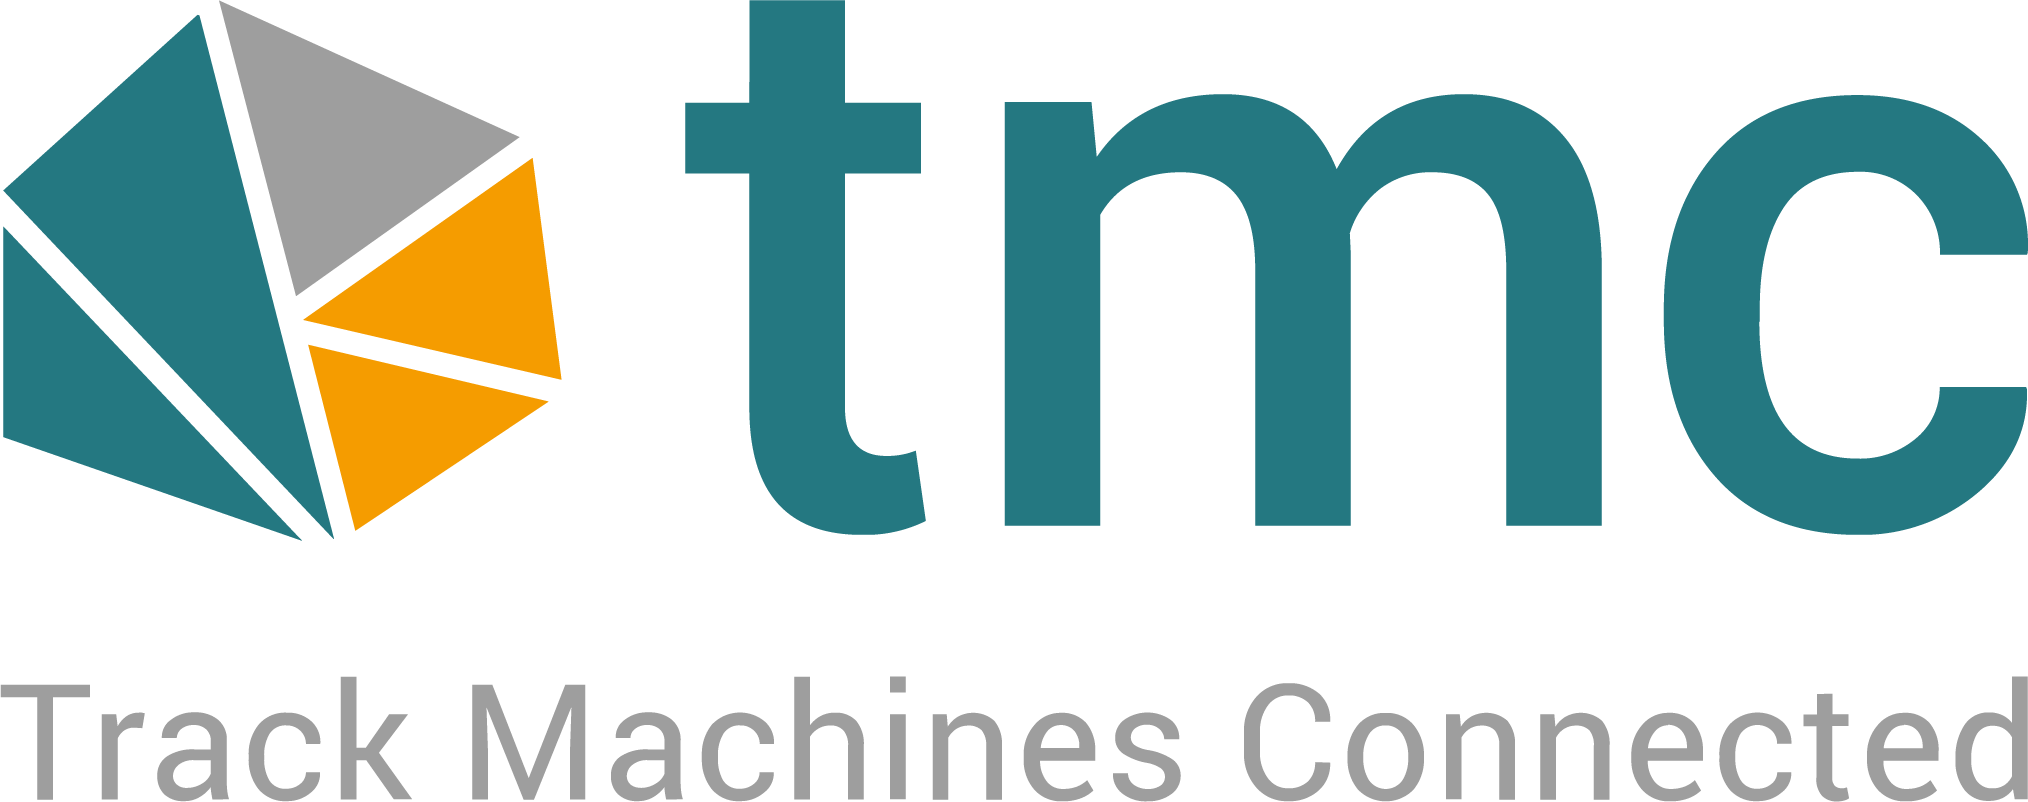 Track Machines Connected - Logo